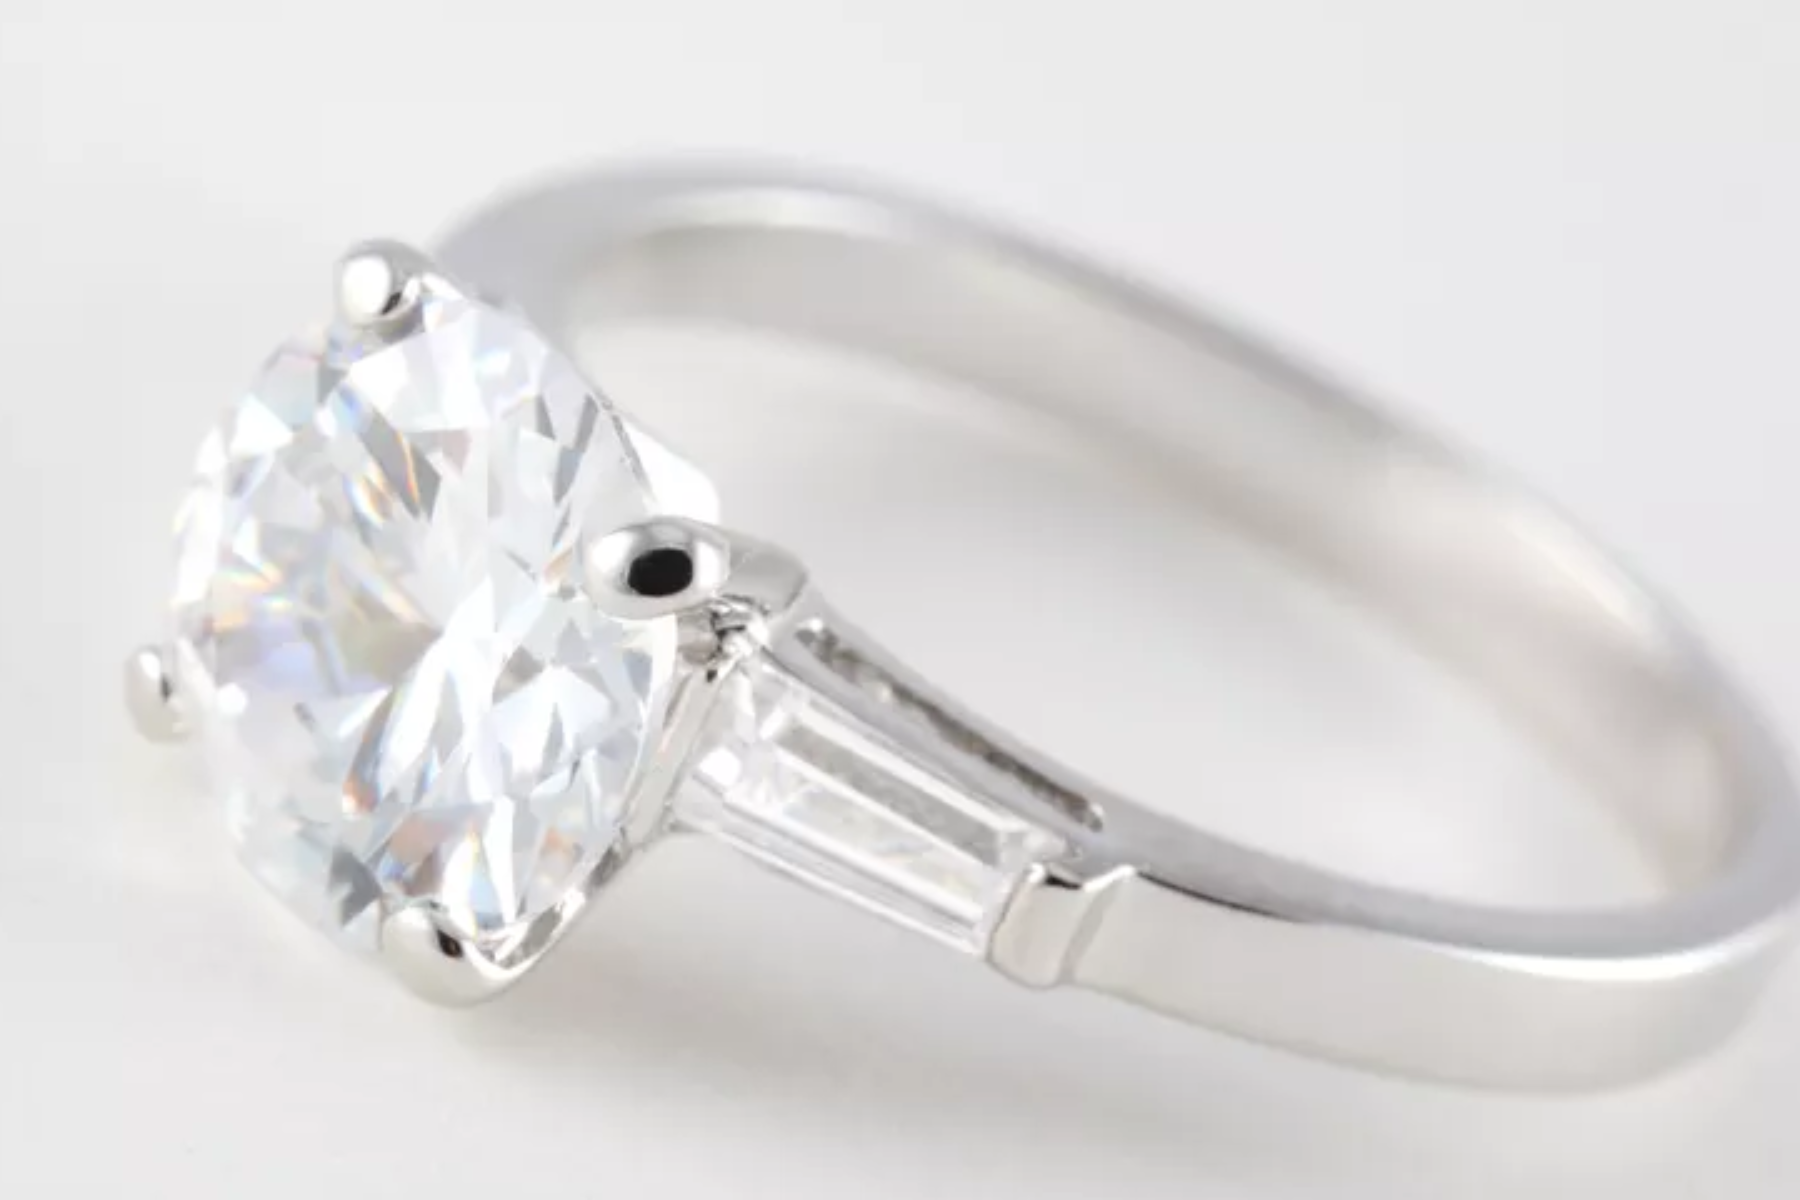 A Bride Is Reunited With The Diamond From Her Engagement Ring After Her Wedding Photographer Spotted The Missing Gem